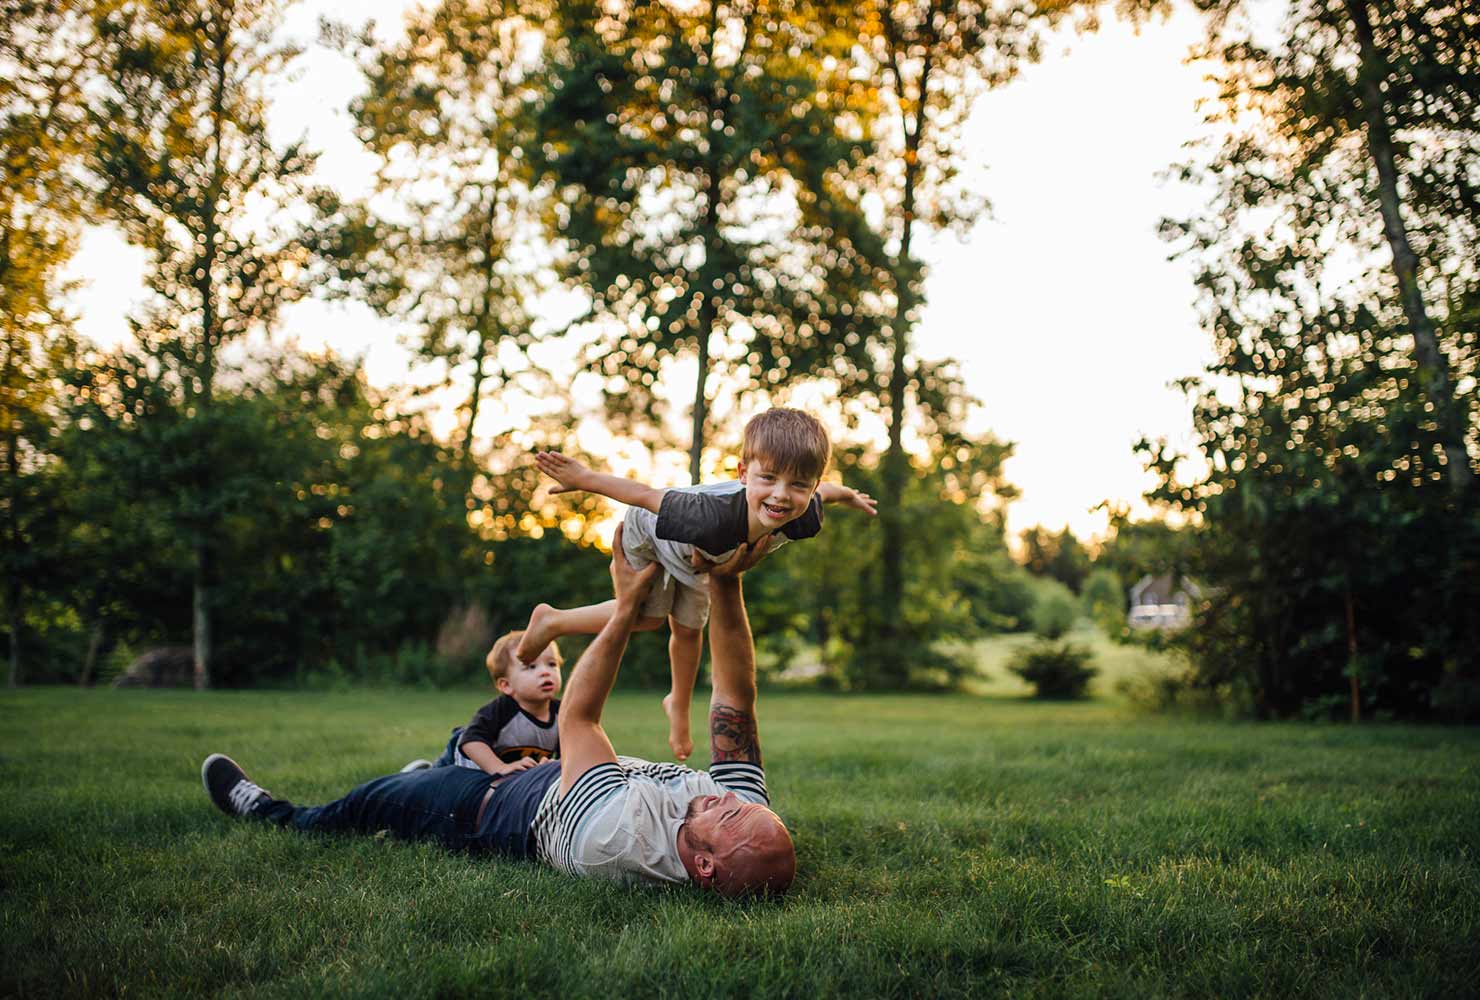 sibling photo ideas fun with dad